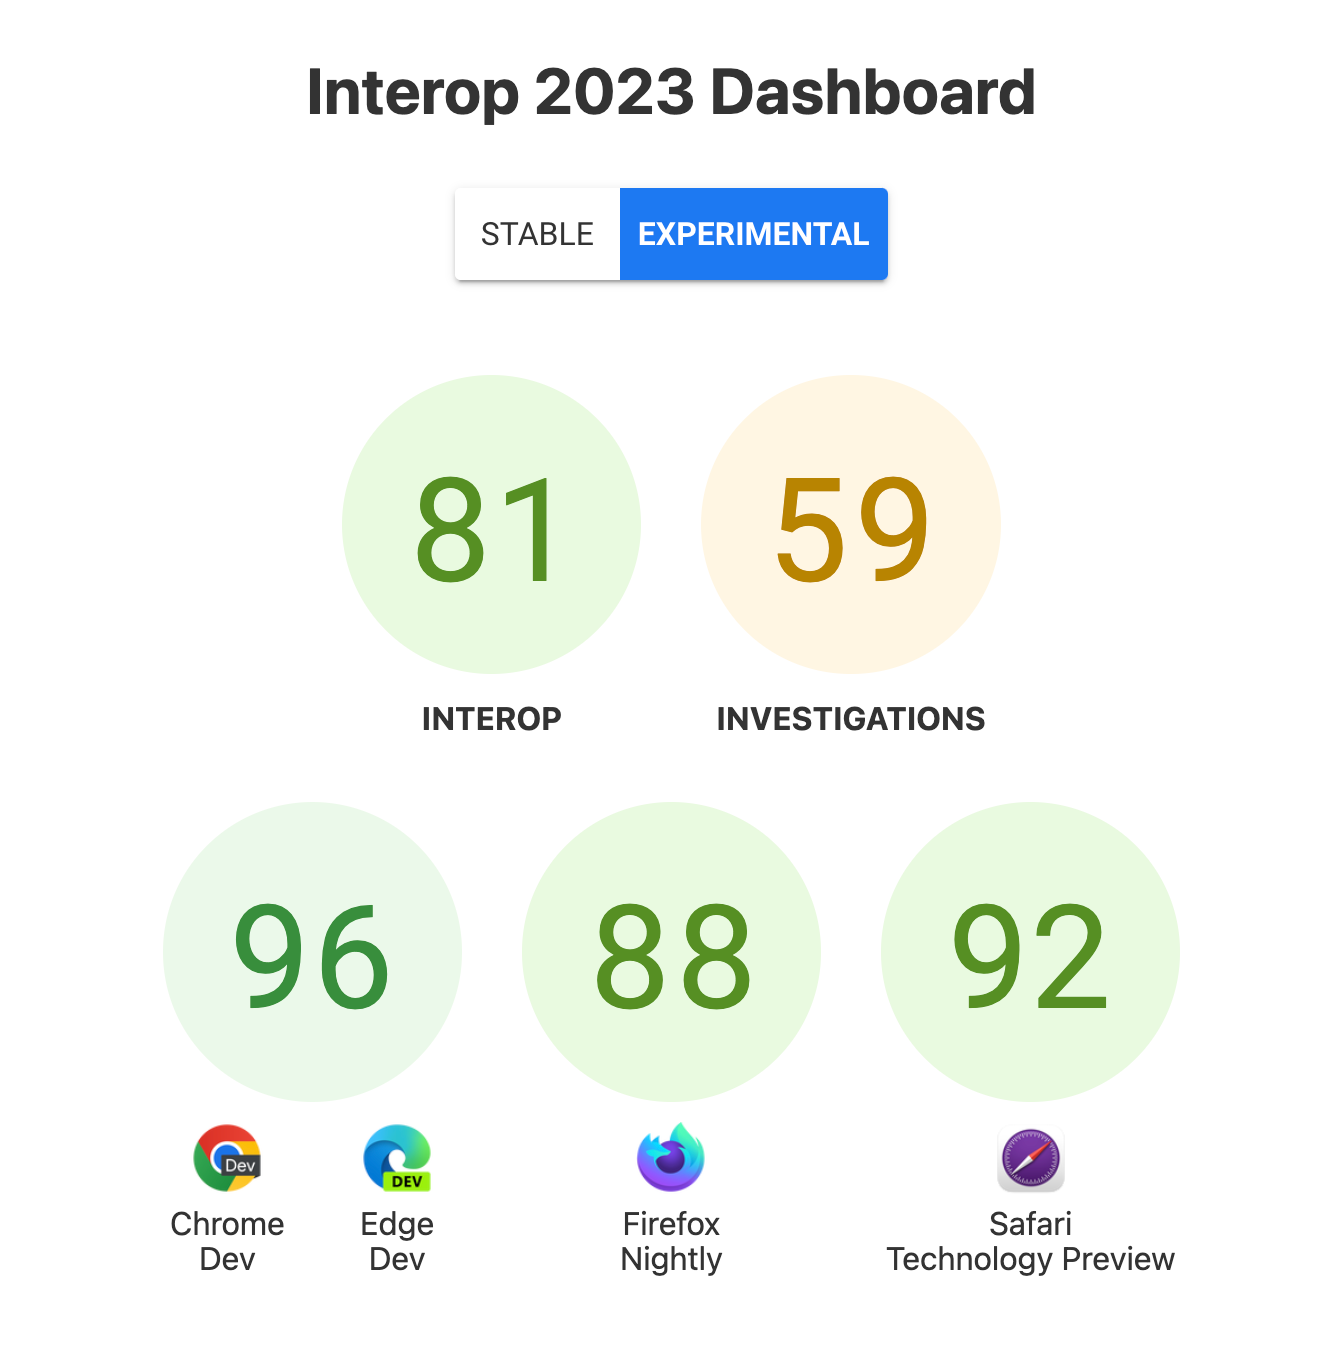 The scores for Interop overall: 81, Investigations 59, and per browser, 96 for Chrome Dev and Edge Dev, 88 for Firefox Nightly, and 92 for Safari Technology Preview.